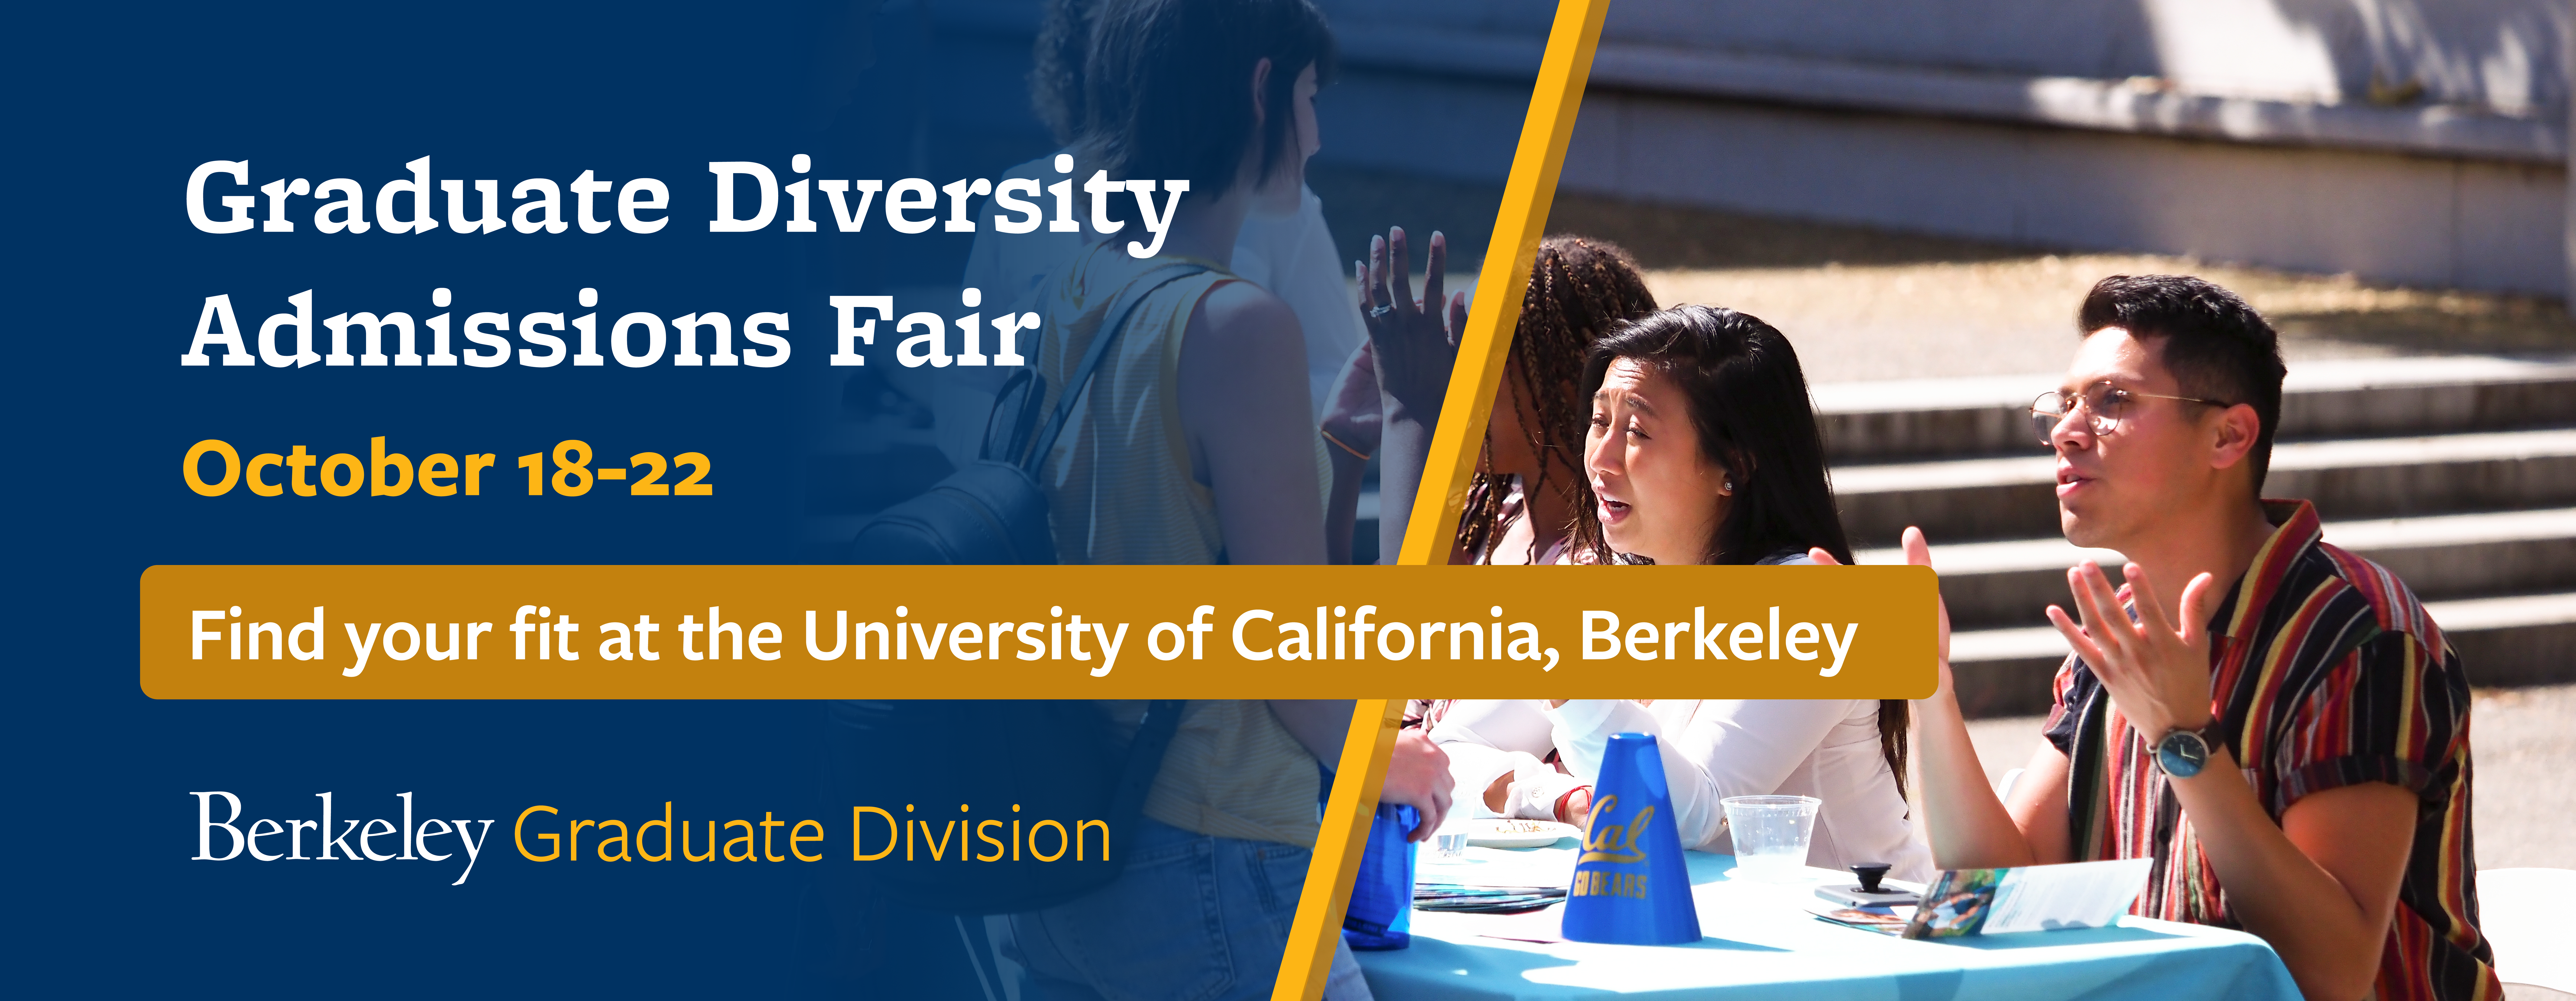 Graduate Diversity Admissions Fair, Oct 18-22, "Find your fit at the University of California Berkeley" with Berkeley Graduate Division logo